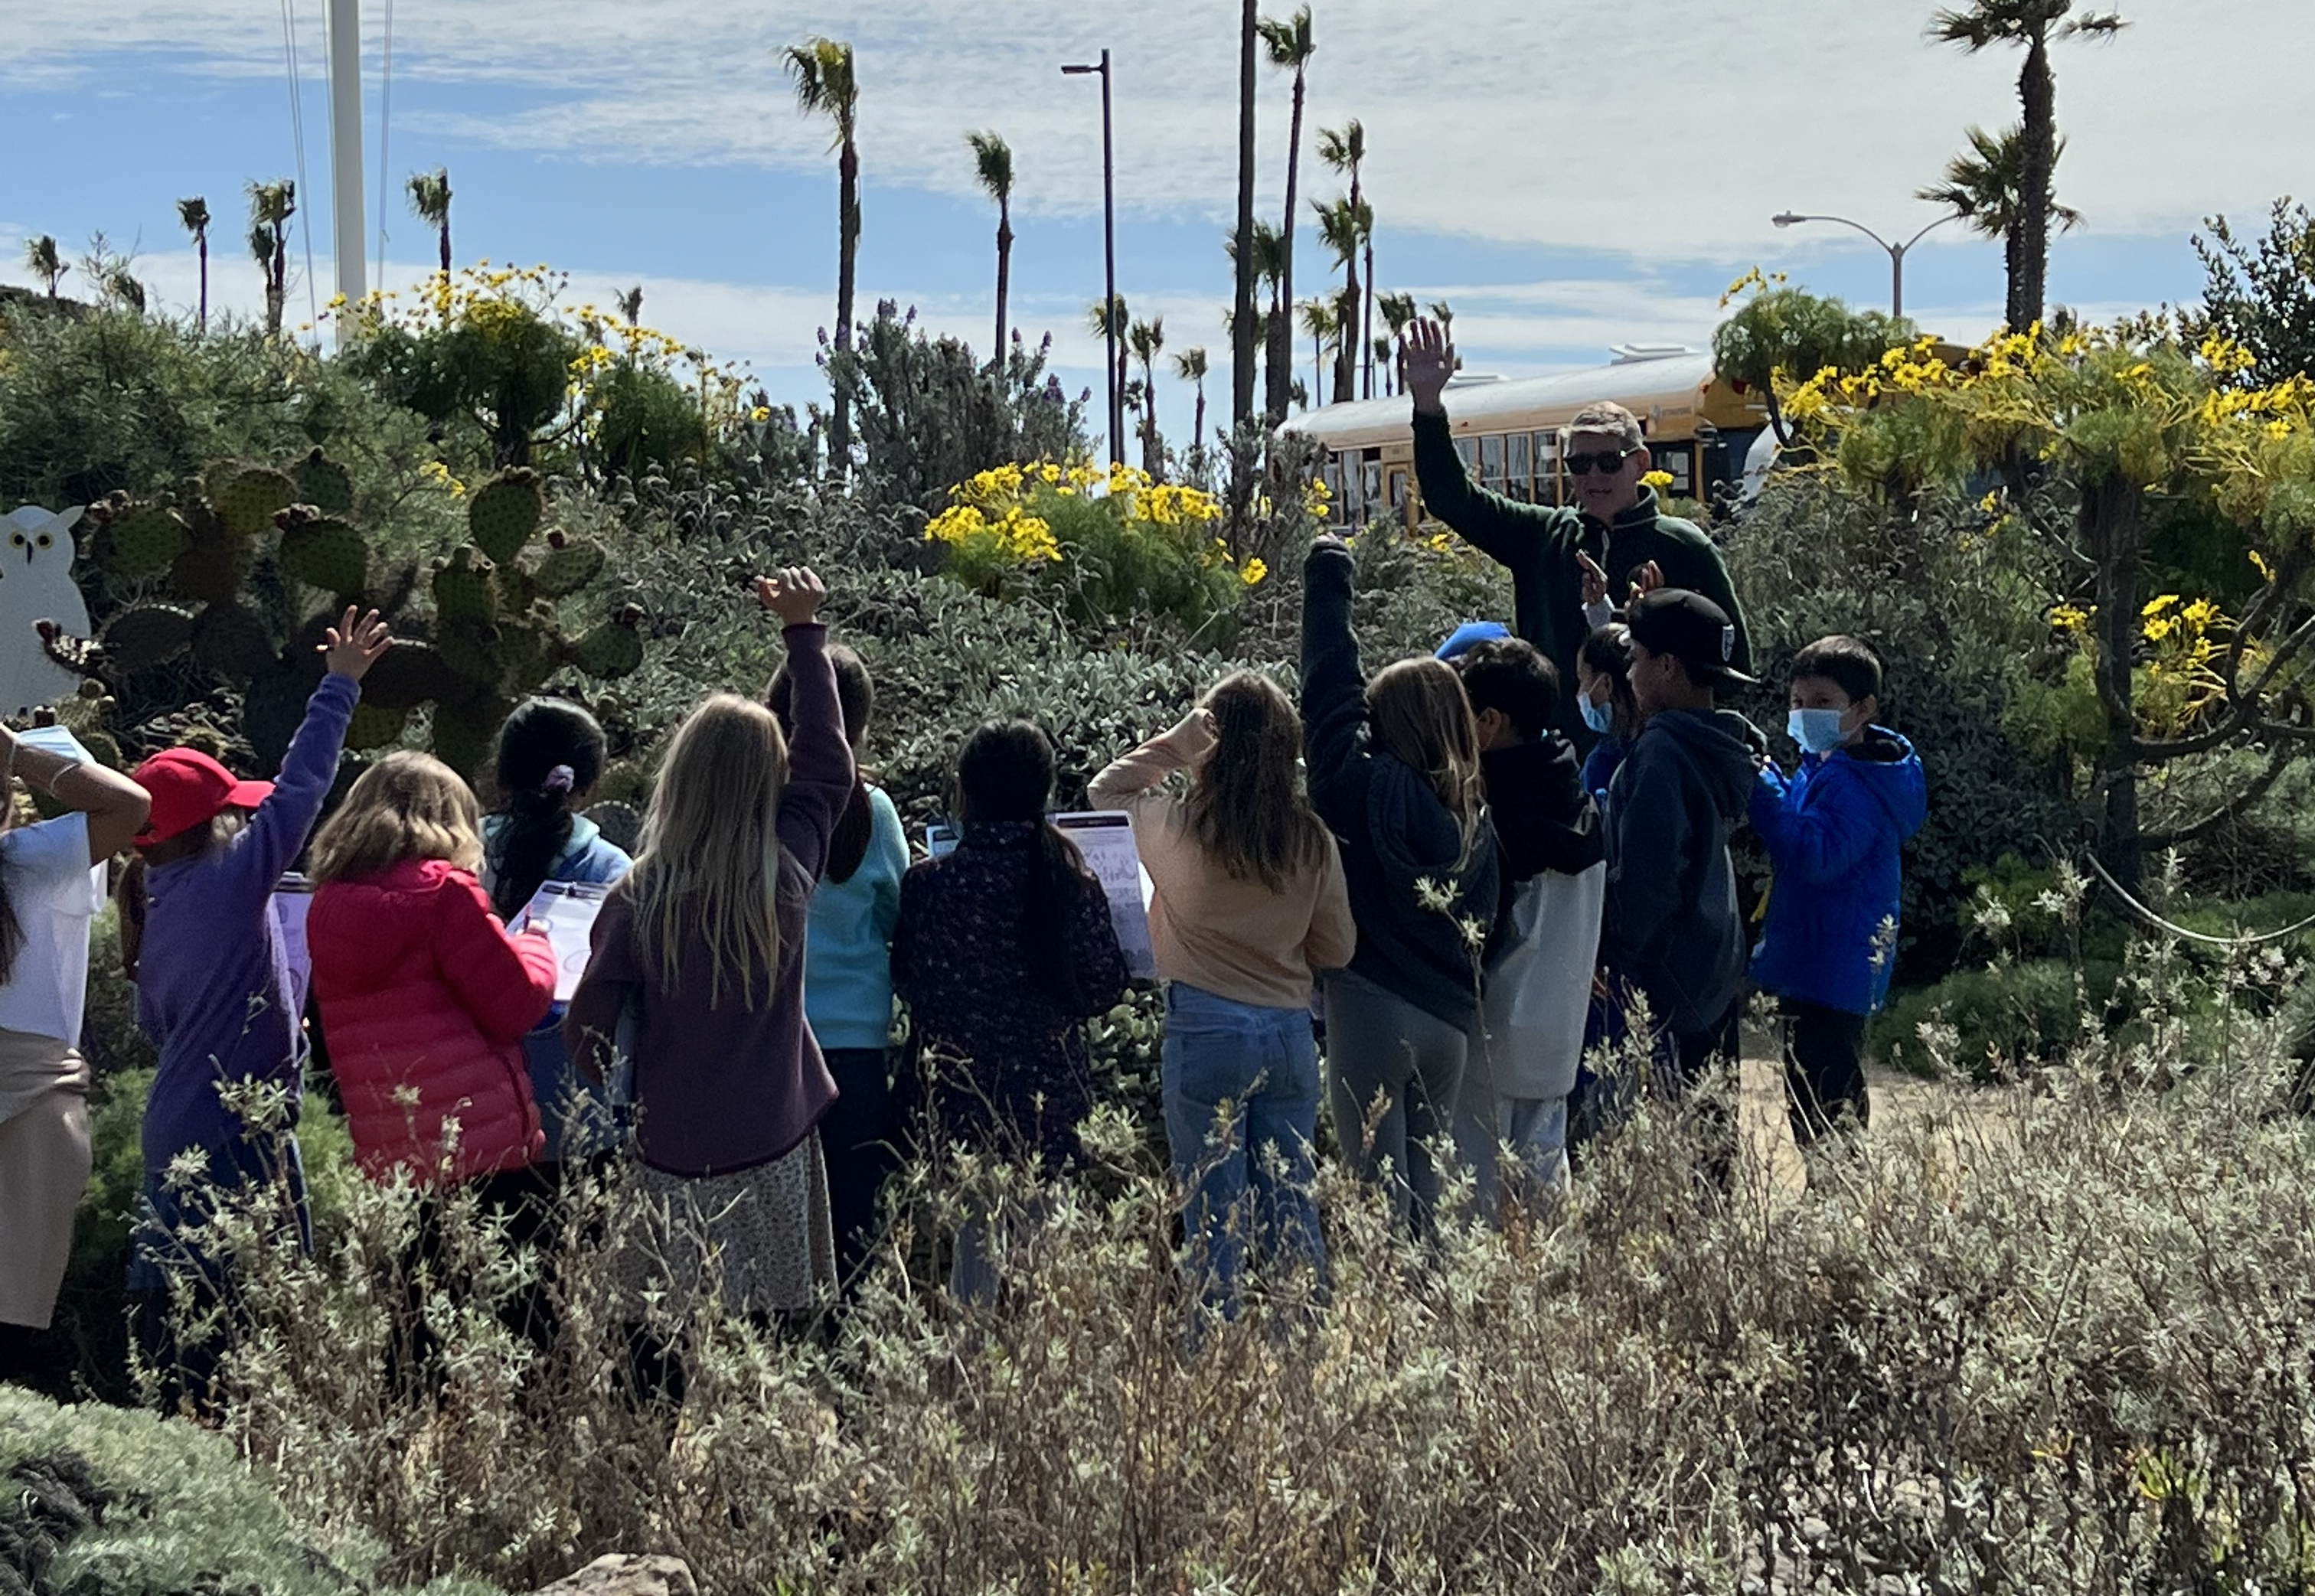 A group a students explore a garden with a male volunteer ranger. A school bus and American flag are in the background.